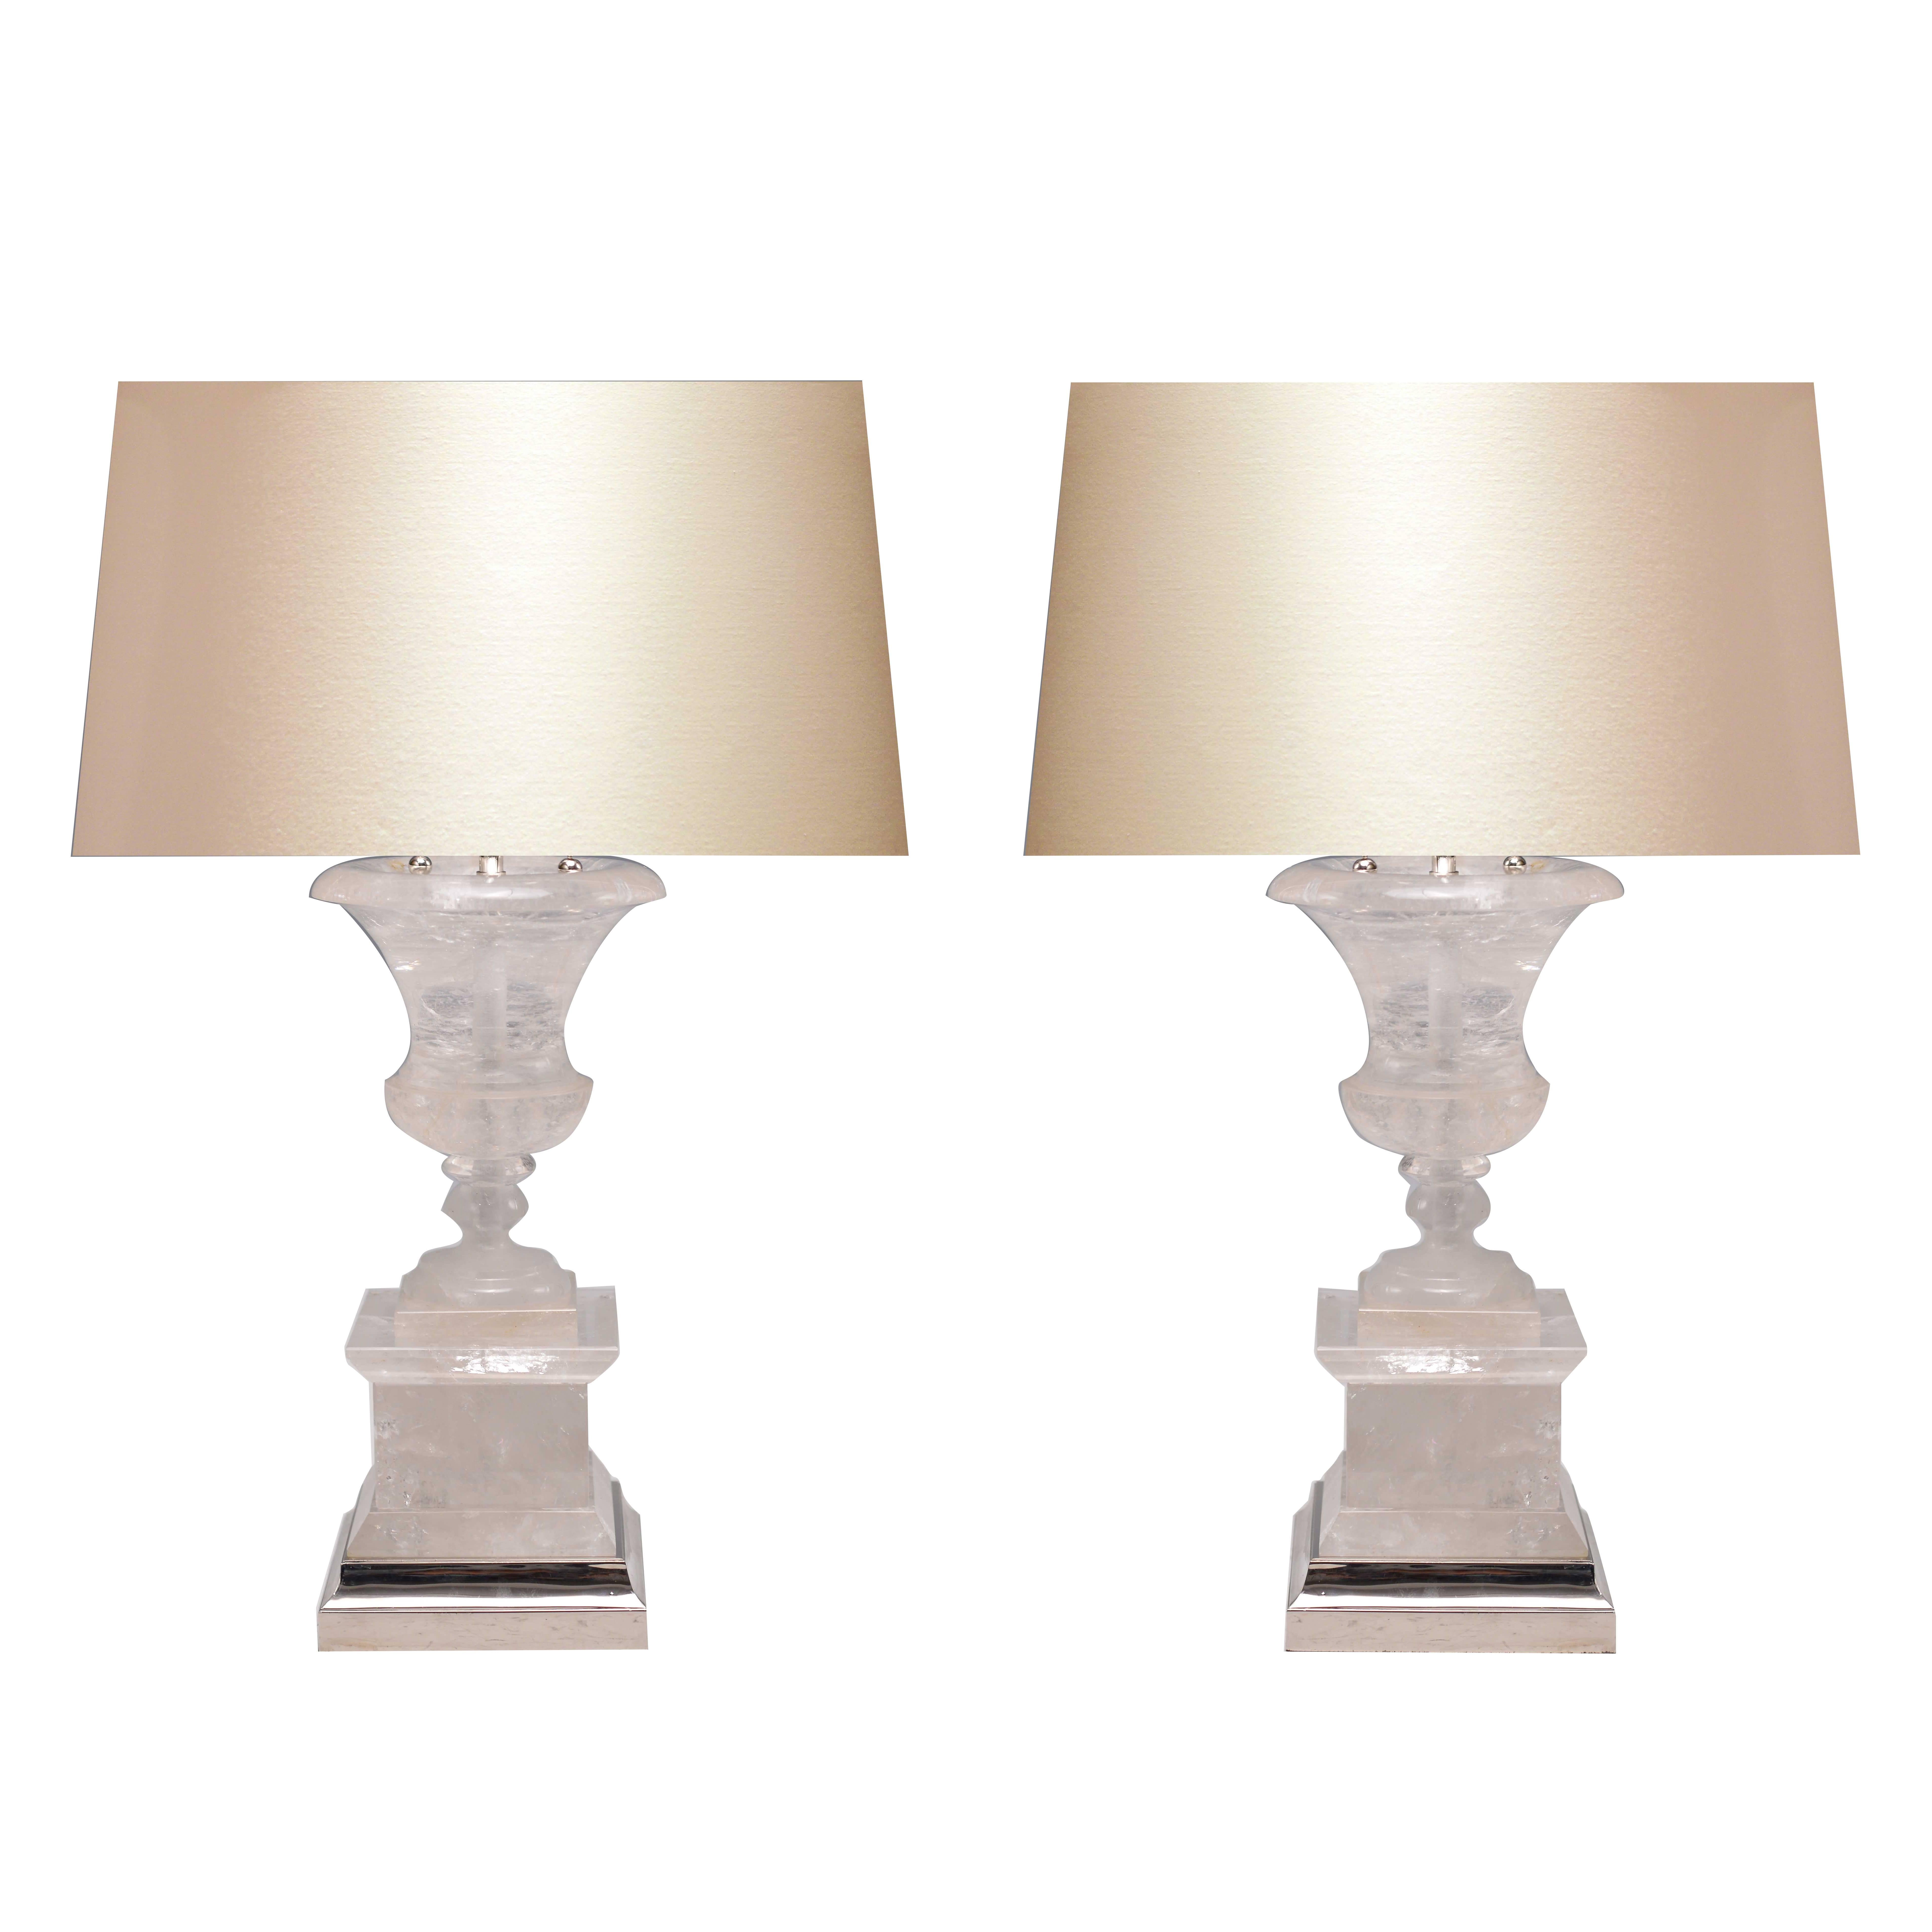 Pair of Fine Carved Rock Crystal Quartz Urn Table Lamps